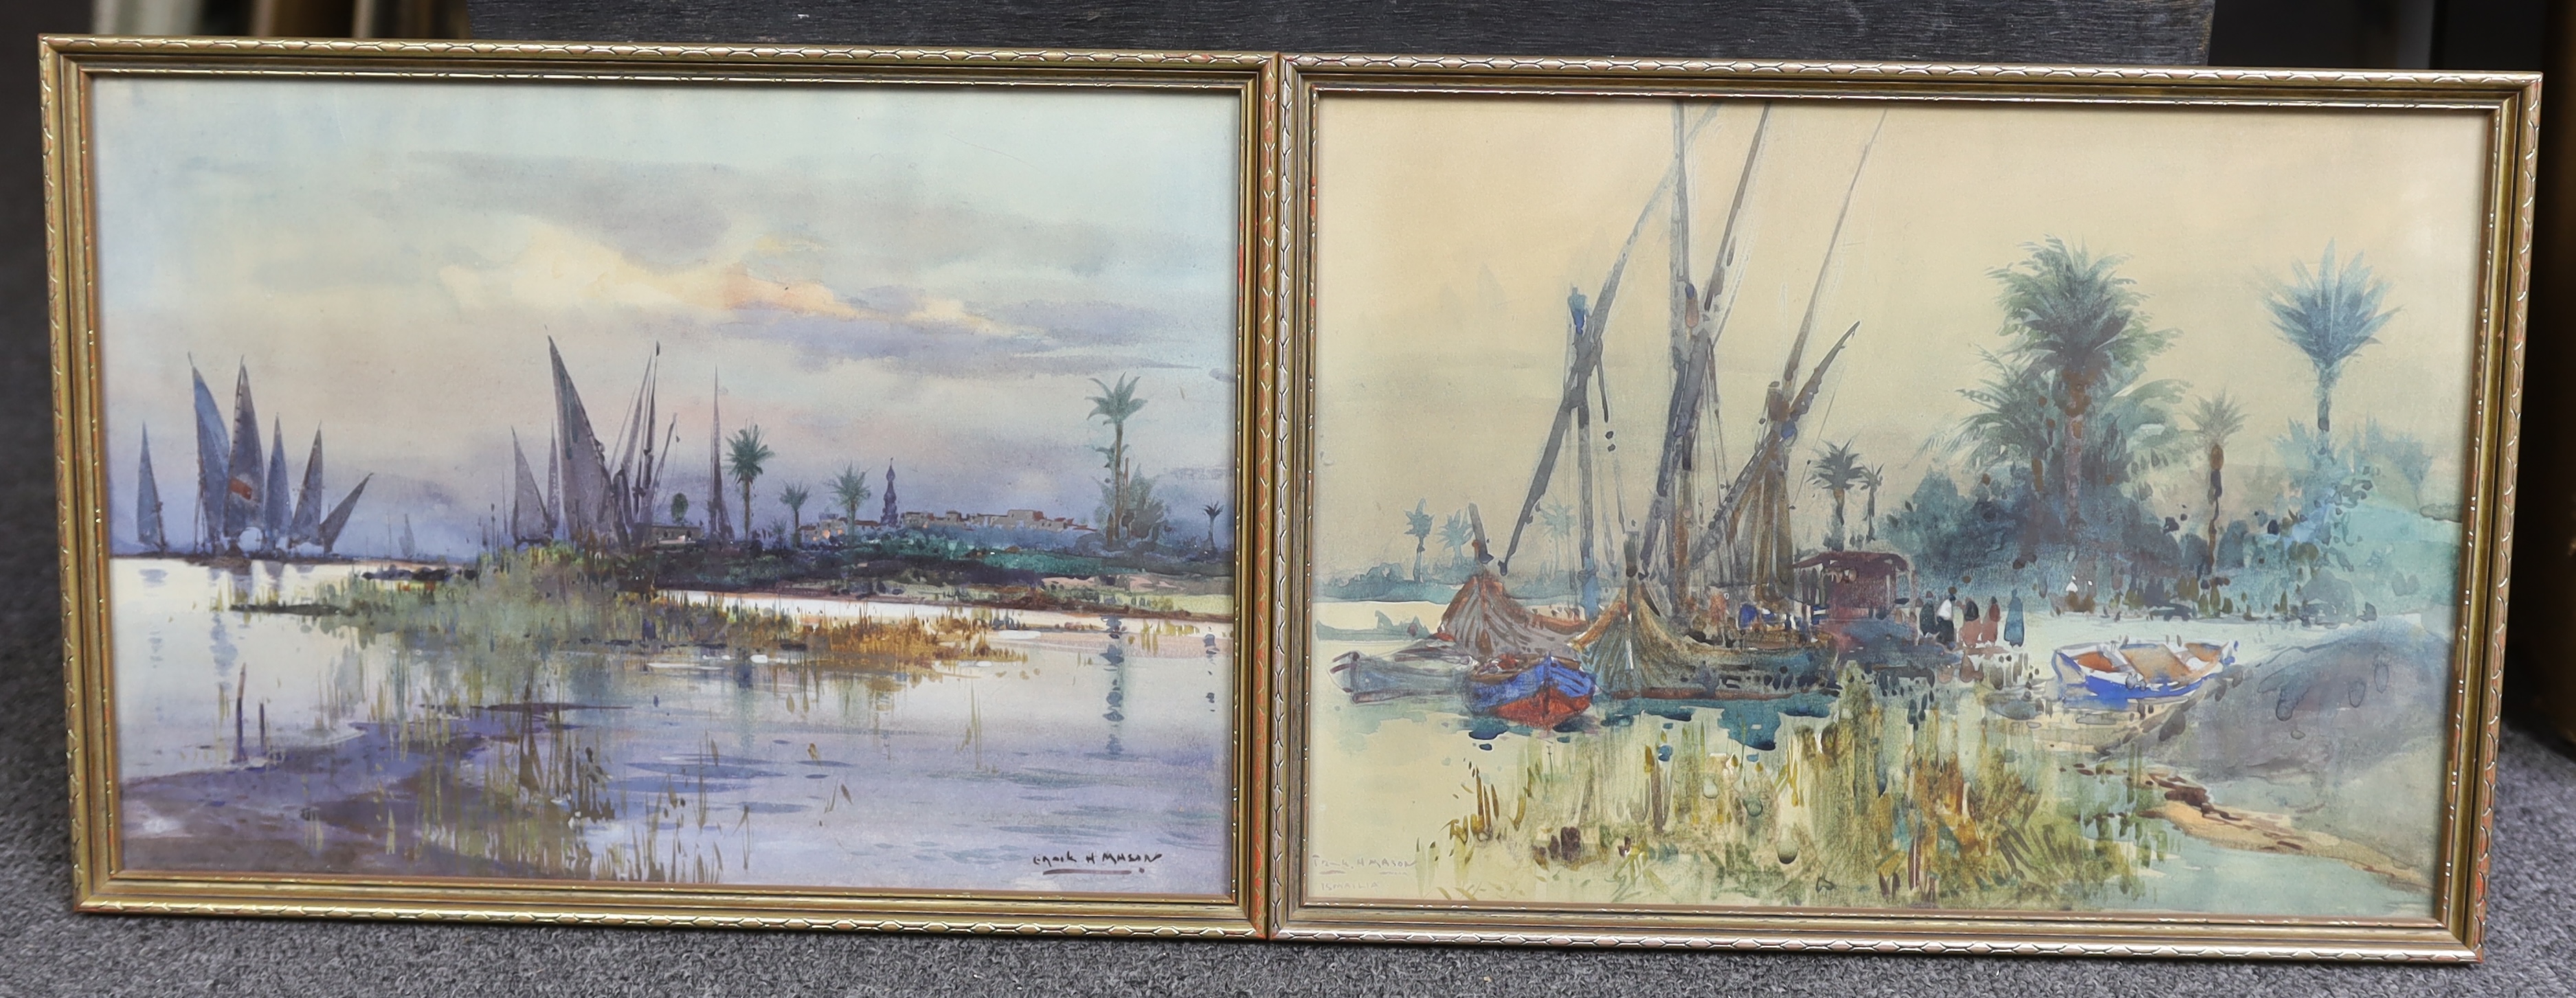 Frank H. Mason (British, 1875-1965), pair of watercolours, 'Ismailia', signed and titled, 24.5 x 34cm